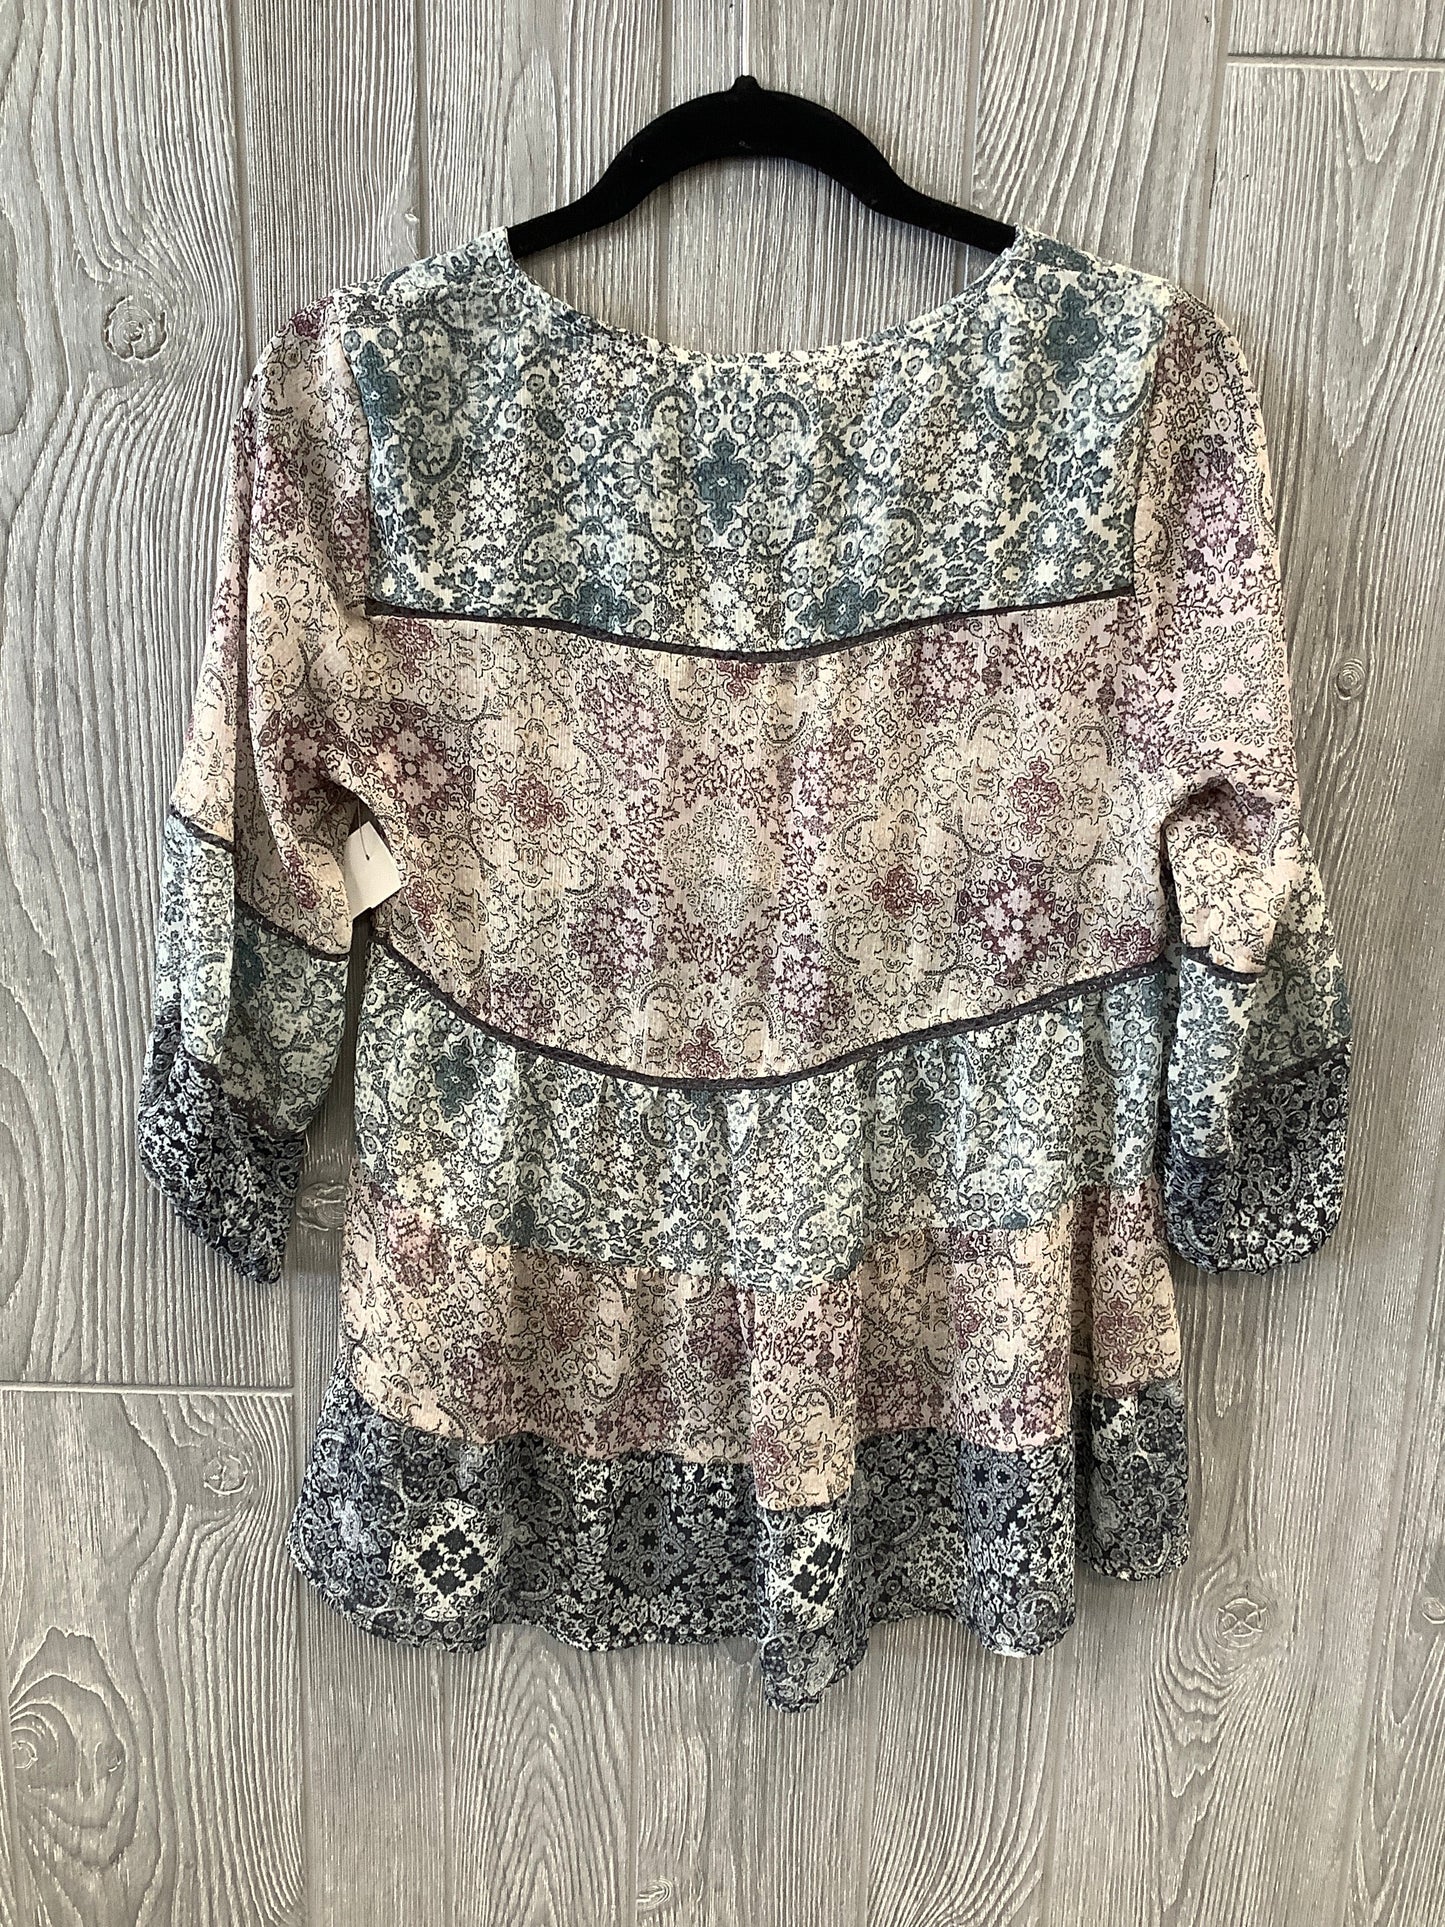 Multi-colored Top 3/4 Sleeve Knox Rose, Size Xs